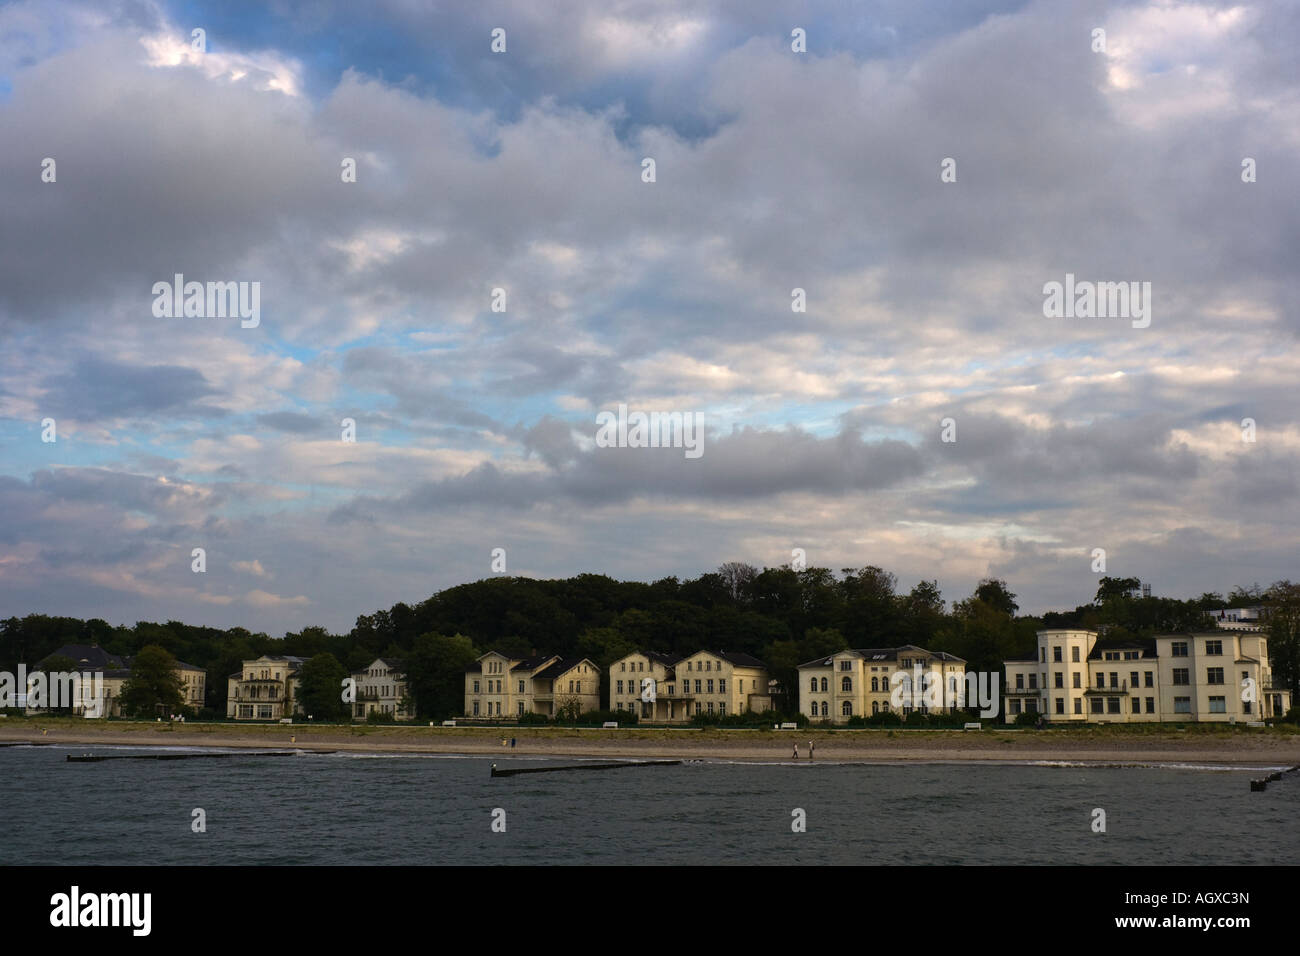 The famous 'Perlenkette', a row of classicist villas along the Baltic sea coast at Heiligendamm, Germany Stock Photo